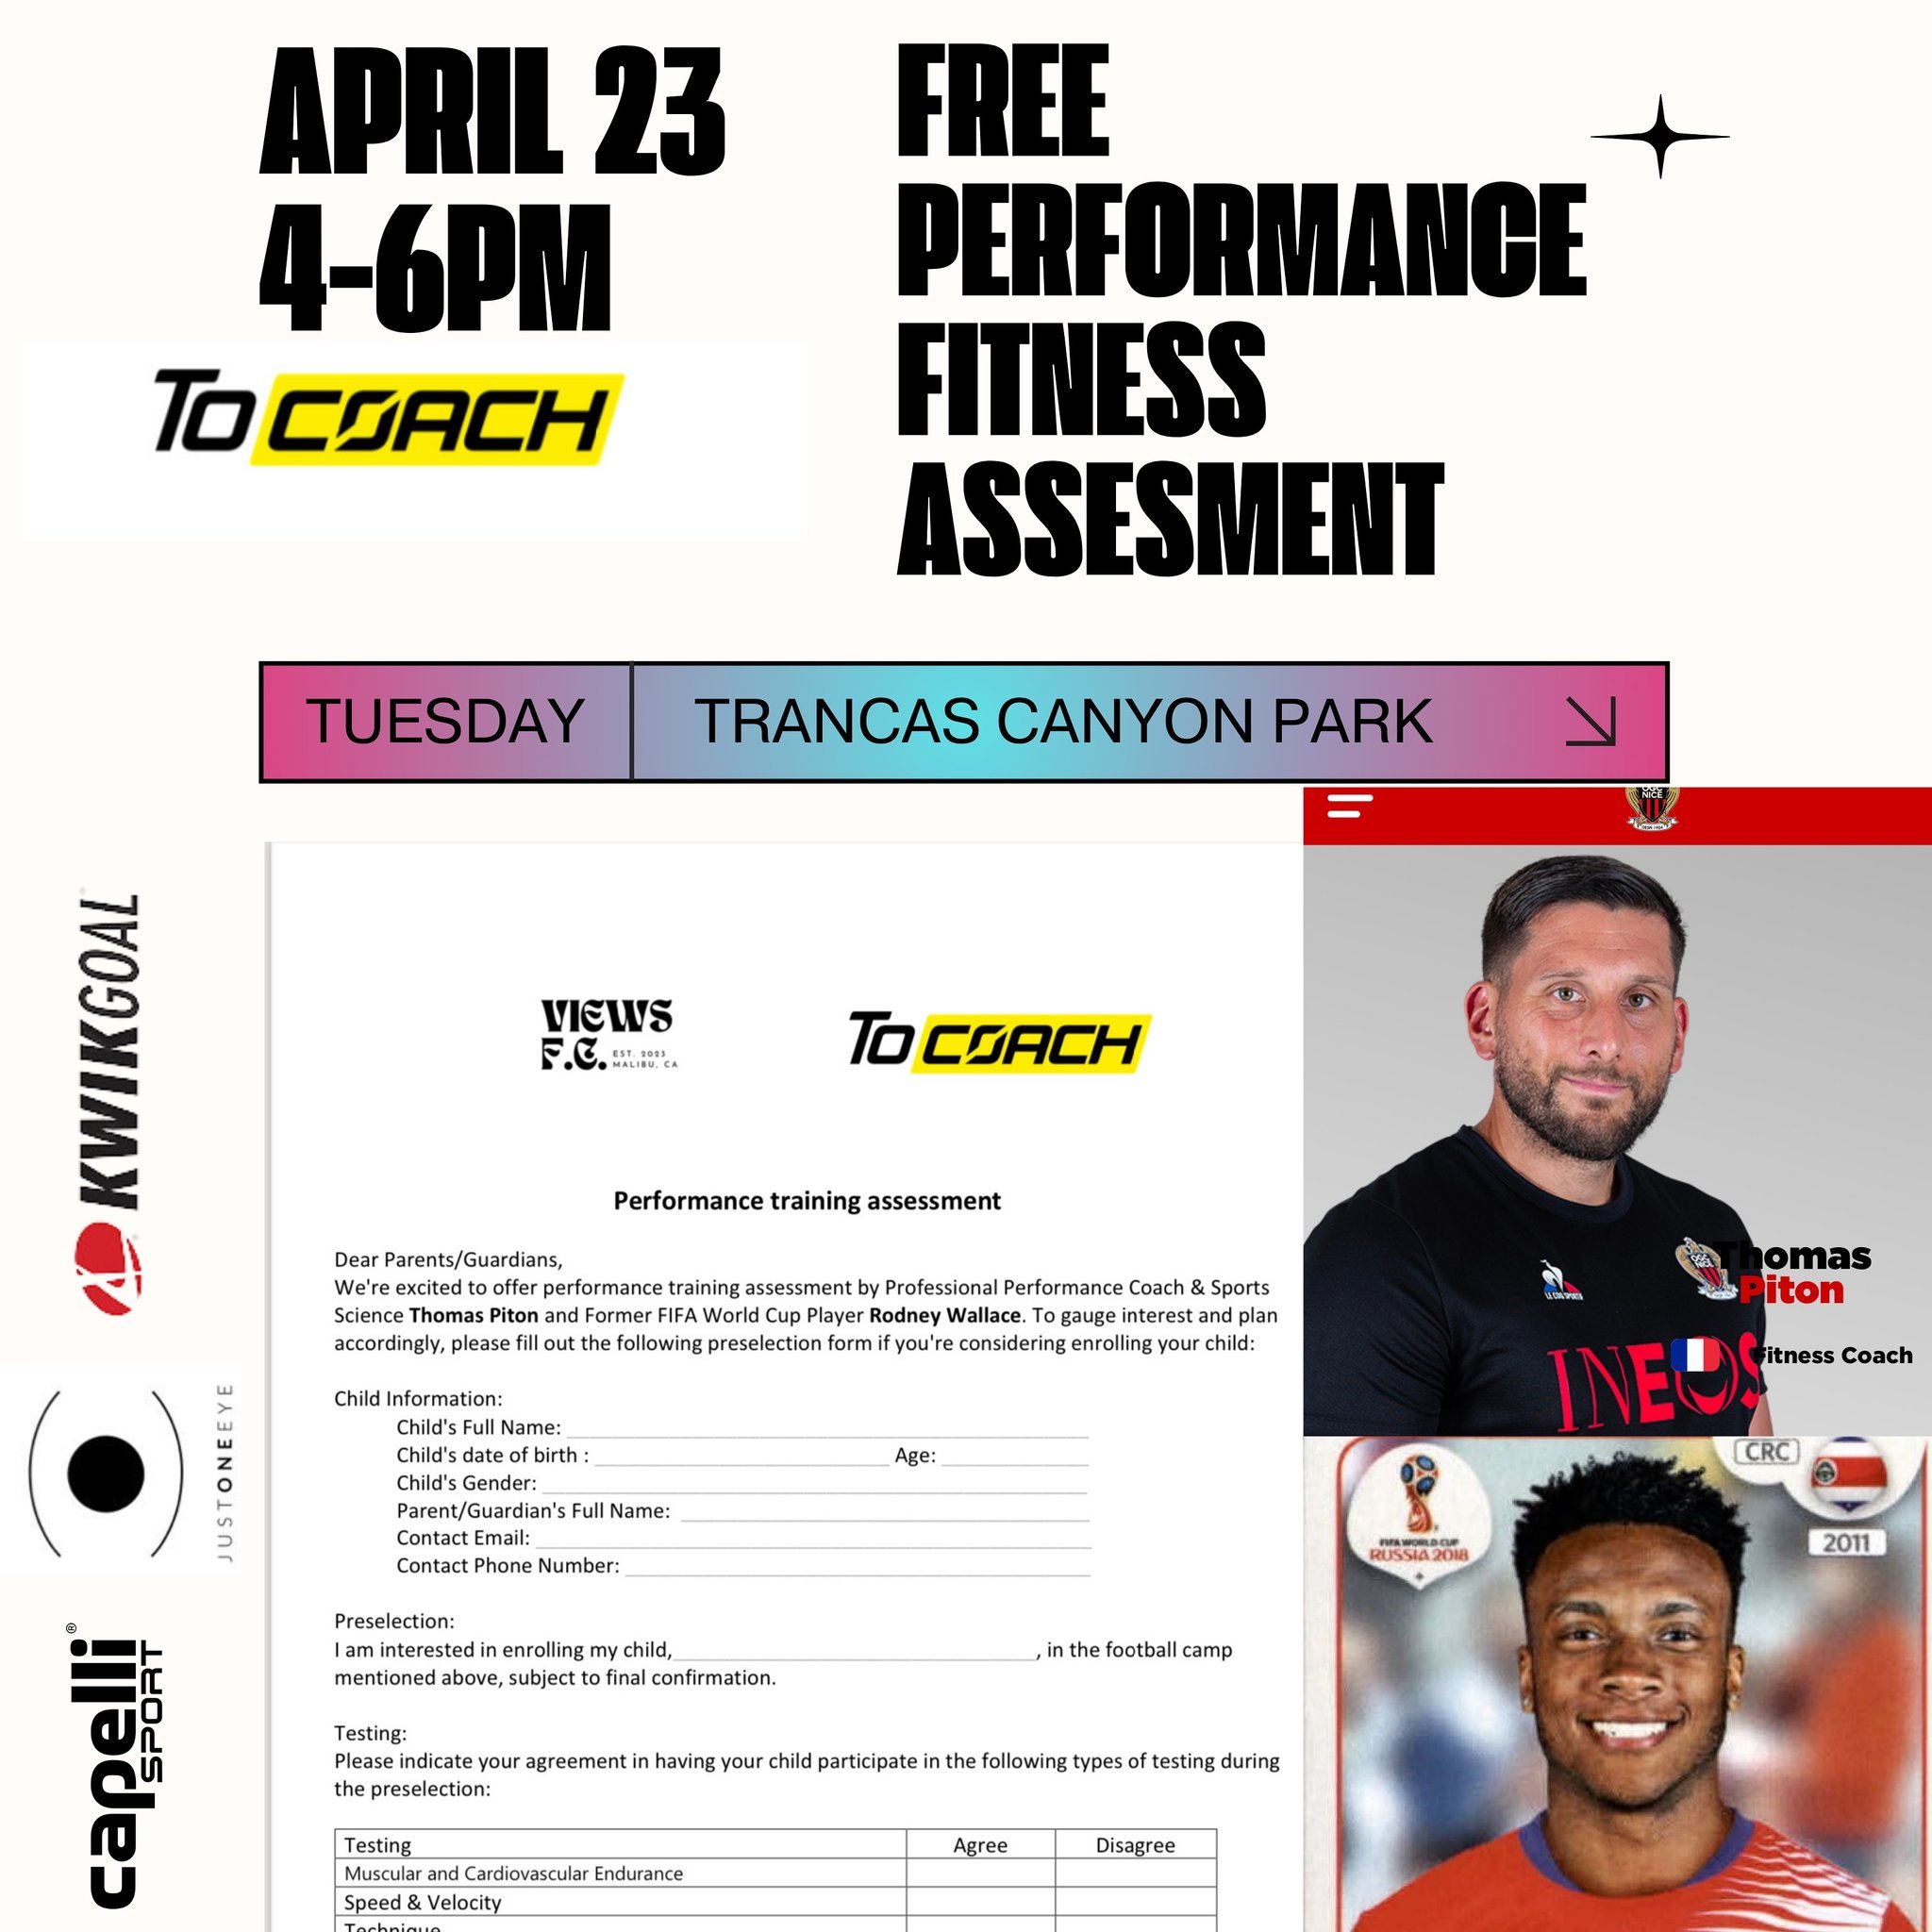 Open to EVERYONE ⚽️⚡️Free Performance Fitness Test with Thomas Piton of @ogcnice_feminines and Views founder @rodwall22 🙌🏼🩵 Tuesday, April 23rd 4pm-6pm
&bull;
&bull;
&bull;
&bull;
#malibu #clubsoccer #performancetraining #ogcnice #soccercamp